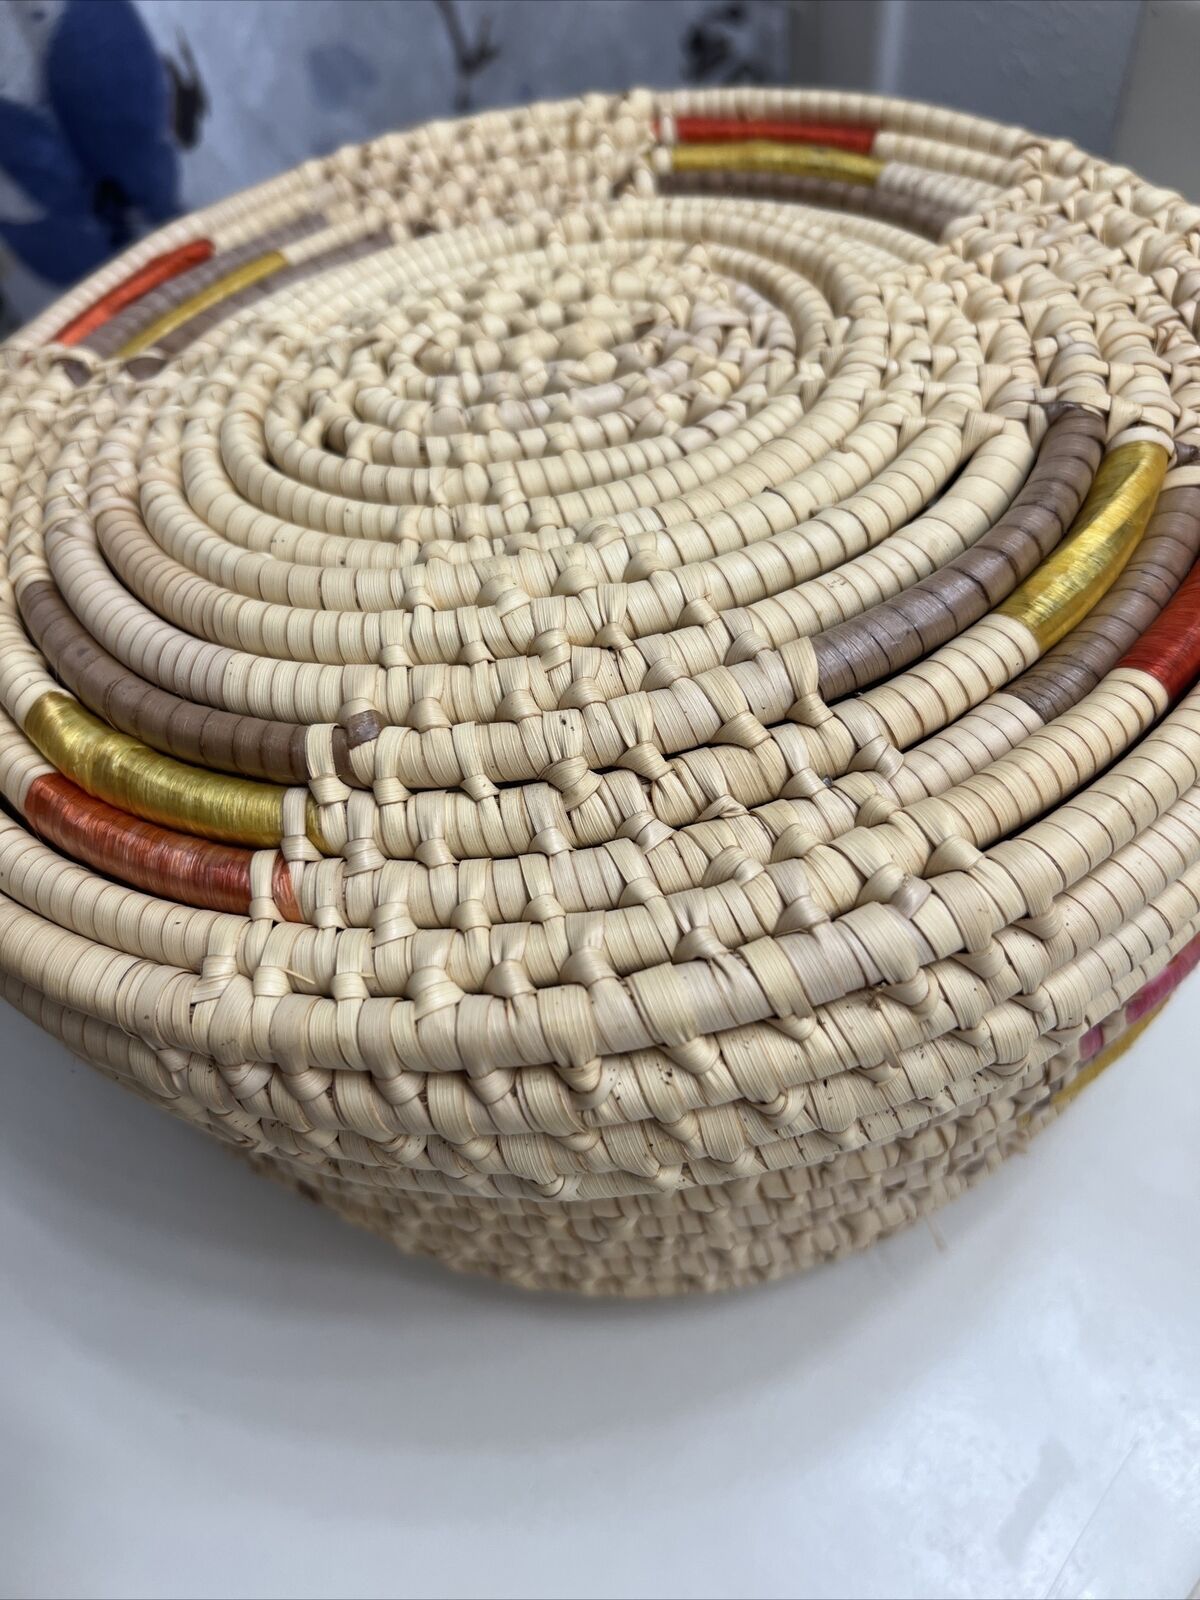 Basket Hand Woven Colorful Coiled Heavy Duty Covered With Lid Storage Bohemian